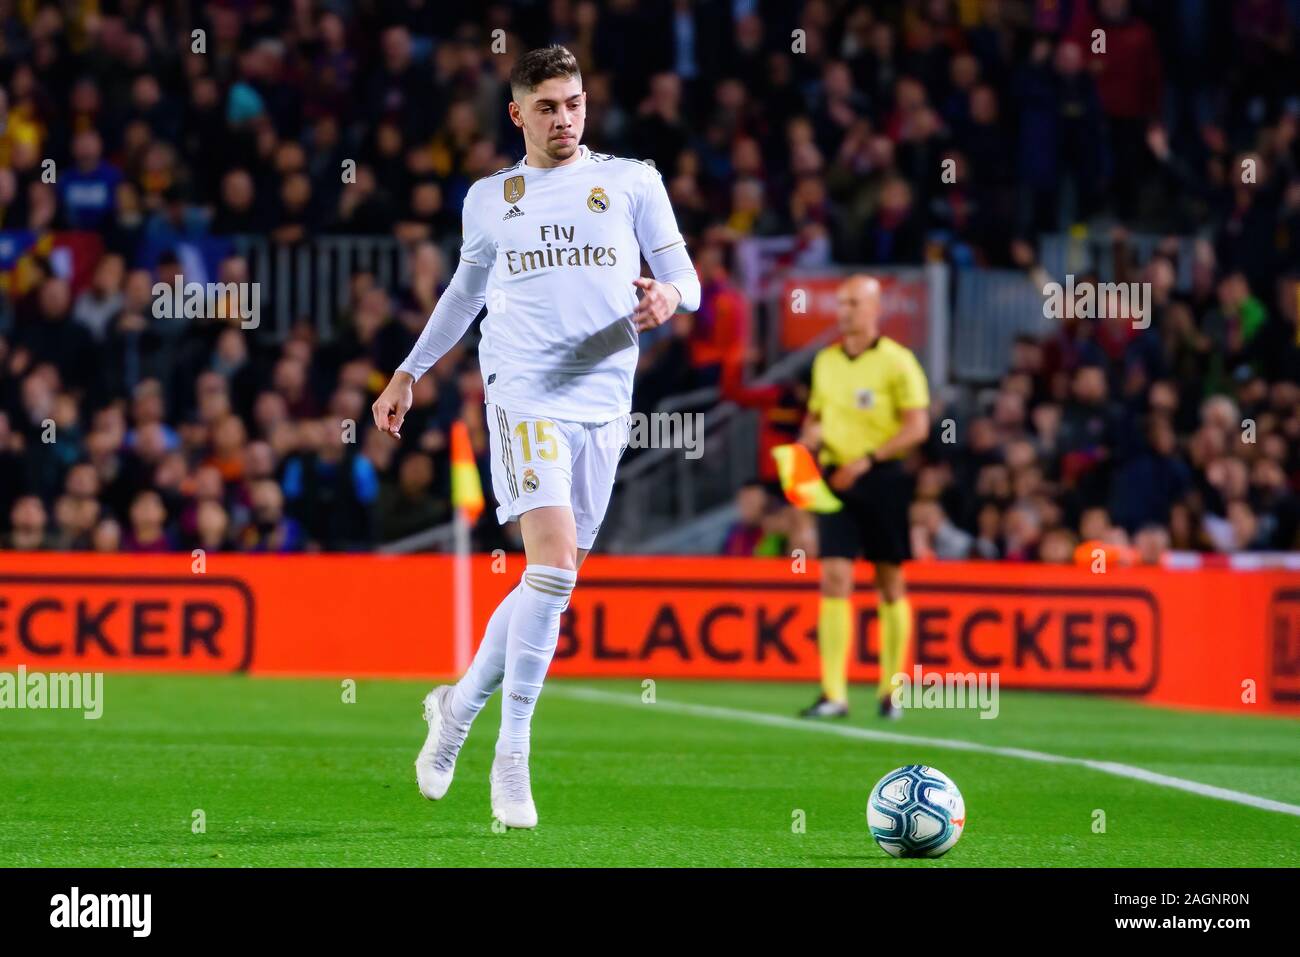 BARCELONA - DEC 18: Federico Valverde plays at the La Liga match between FC Barcelona and Real Madrid at the Camp Nou Stadium on December 18, 2019 in Stock Photo